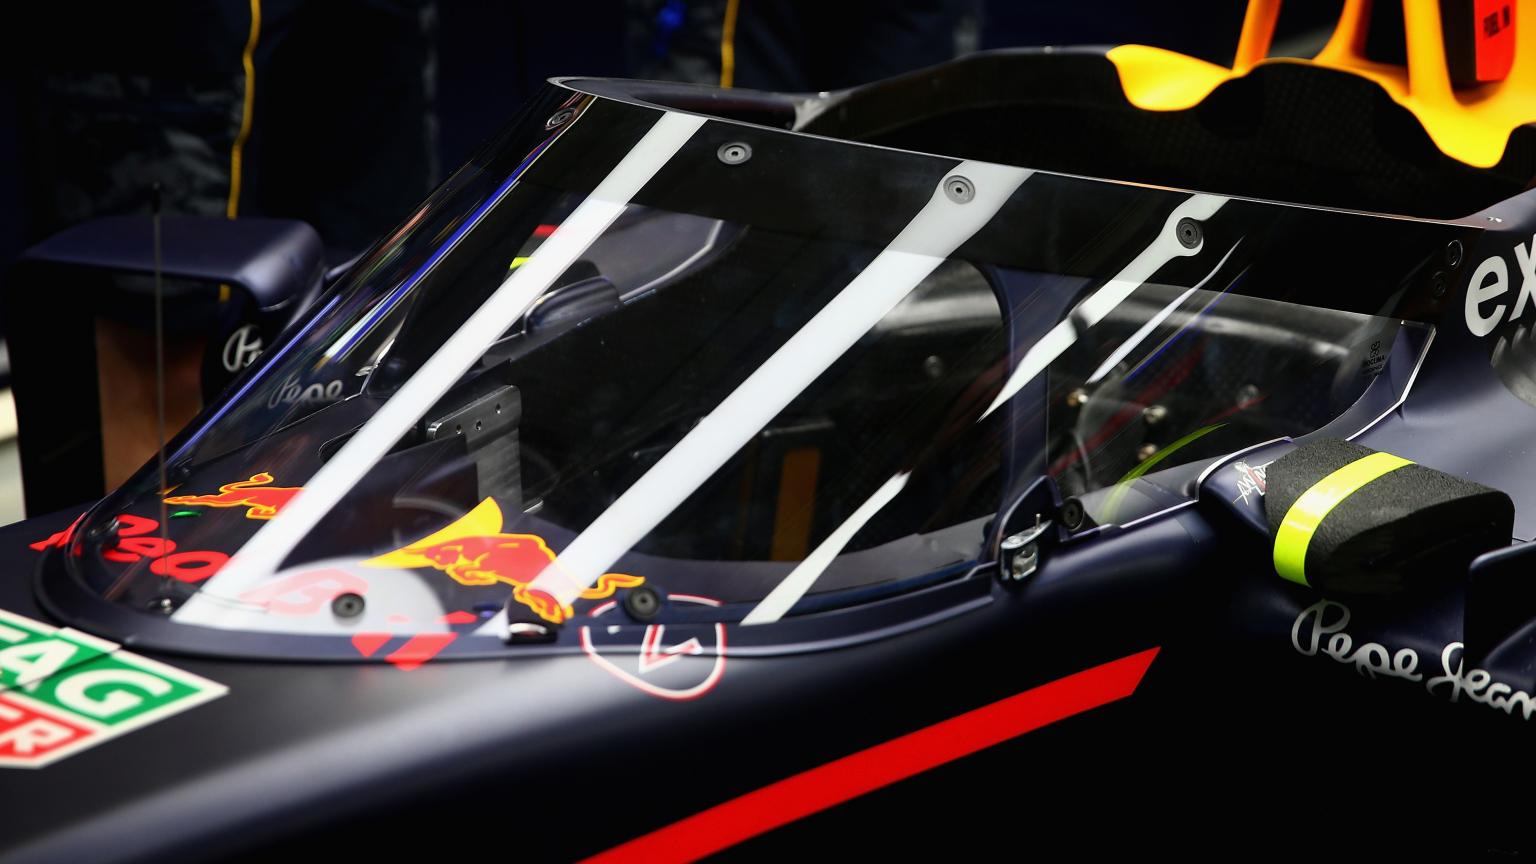 TopGear | Video: Red Bull tests its windscreen for F1 cars